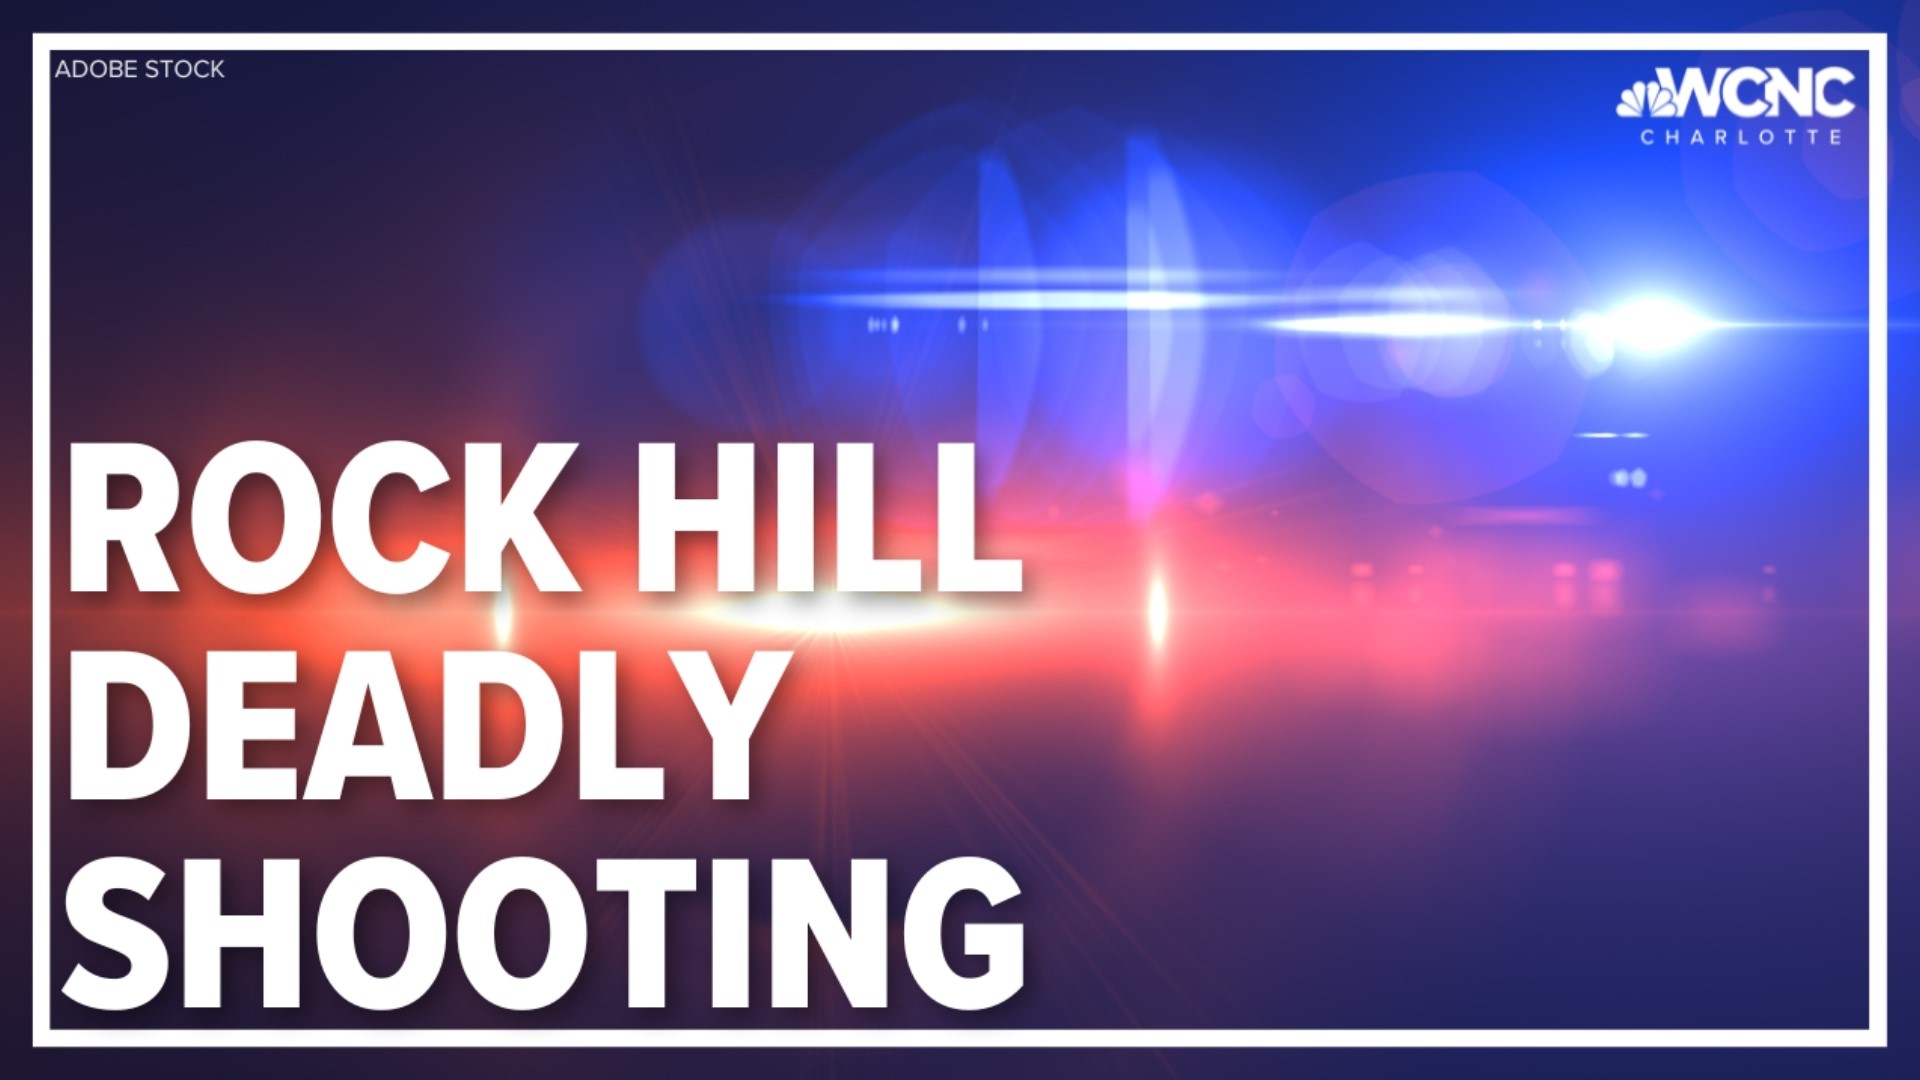 Four teenagers are facing charges in connection with the deadly shooting of a man in Rock Hill early Monday, the Rock Hill Police Department said.